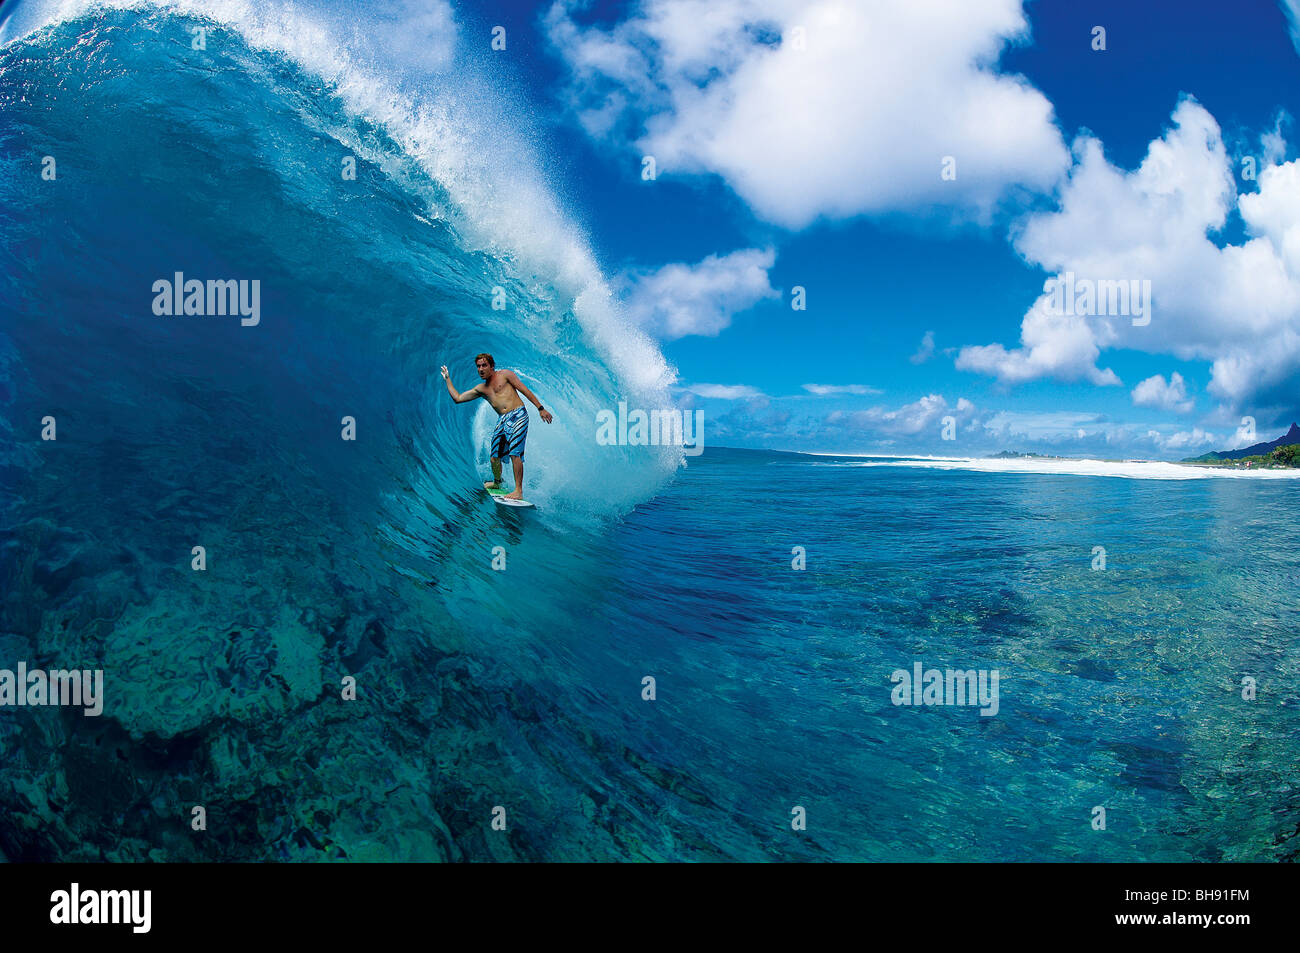 Surfer in the tube of large wave on a reef break in the Cook Islands Stock Photo